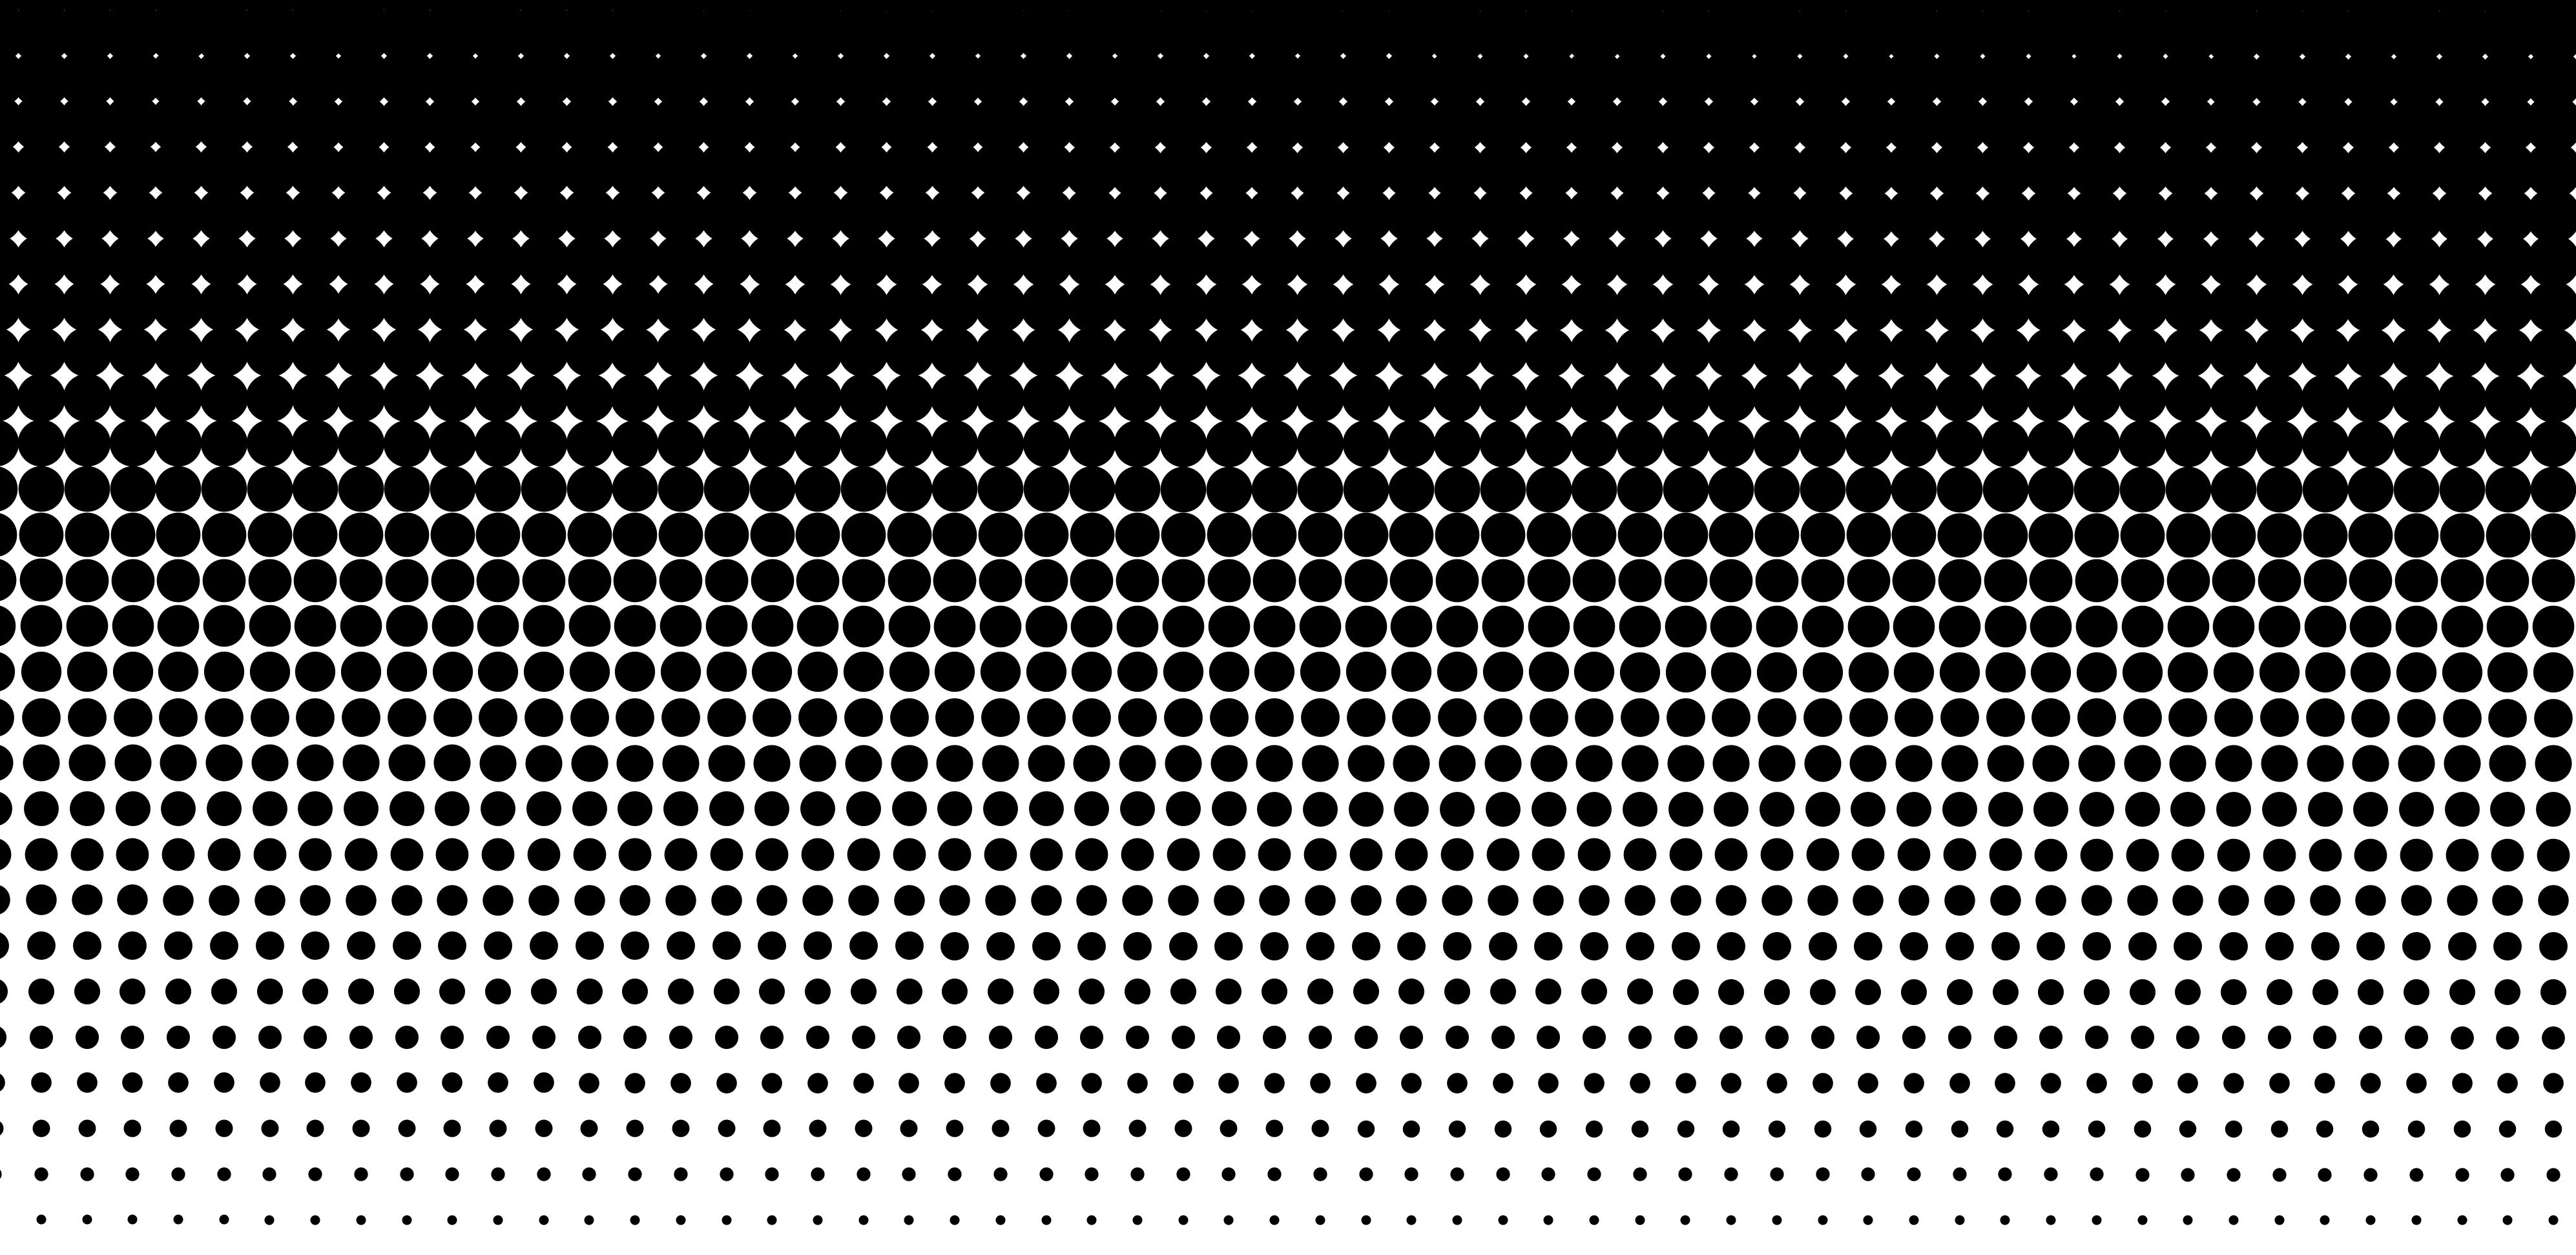 Black and White Halftone Background - Free Clip Art